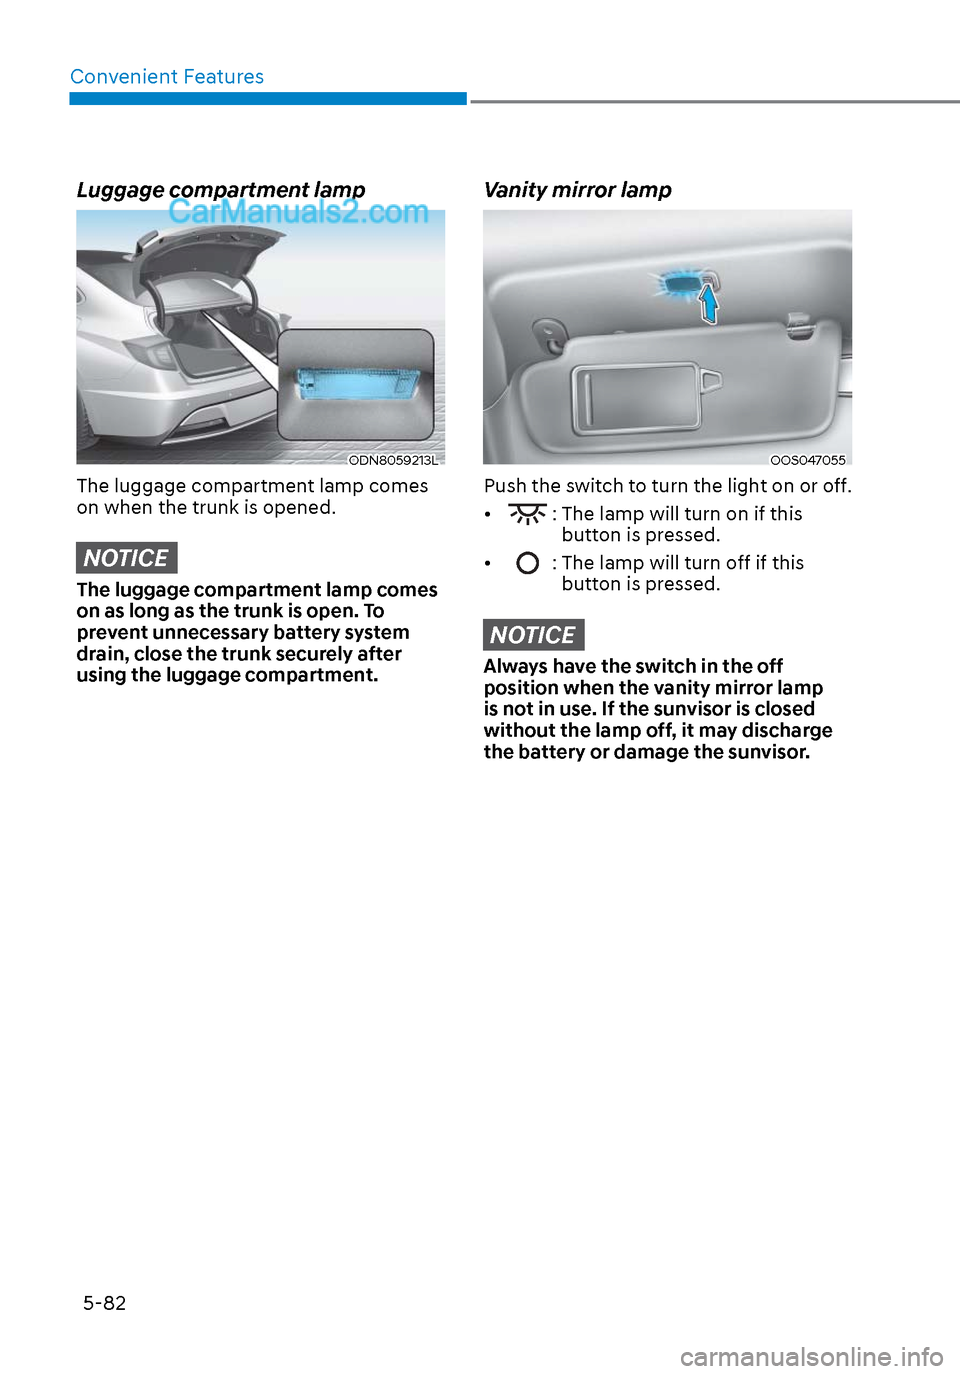 Hyundai Sonata 2020 Owners Guide Convenient Features5-82
Luggage compartment lamp
ODN8059213LODN8059213L
The luggage compartment lamp comes 
on when the trunk is opened.
NOTICE
The luggage compartment lamp comes 
on as long as the tr